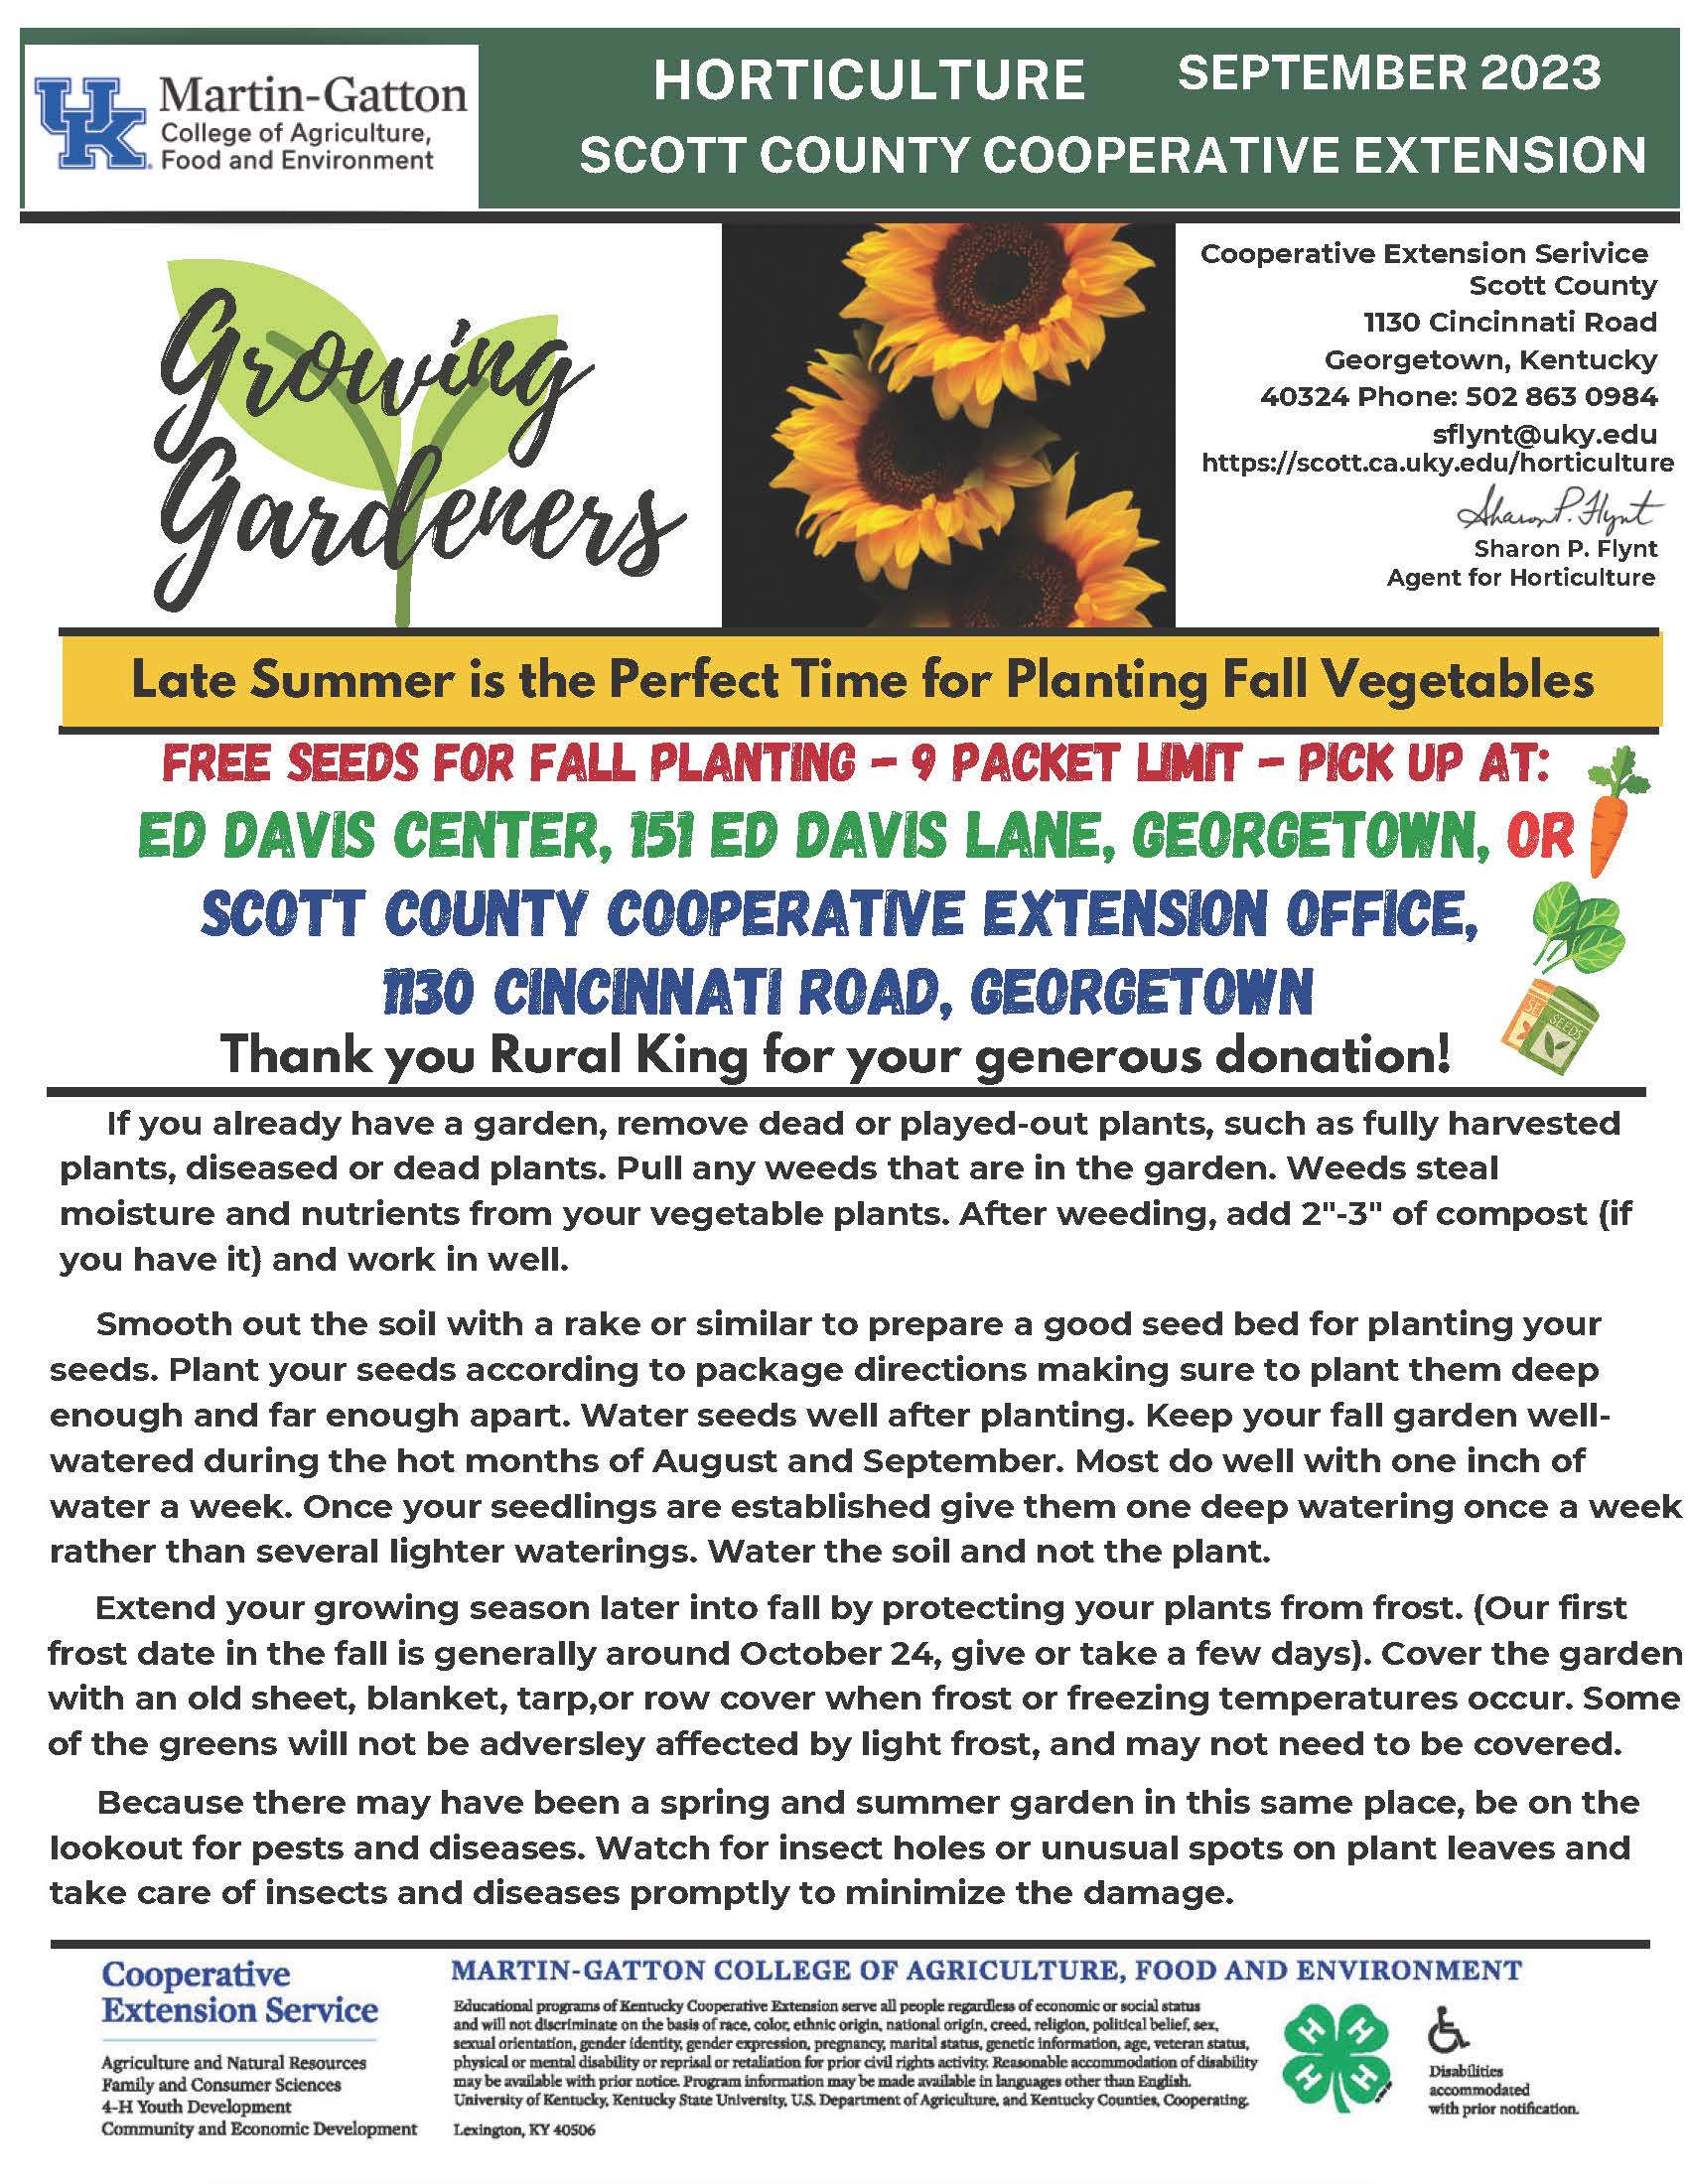 September 2023 Growing Gardeners Newsletter Preview. Click download for full pdf.